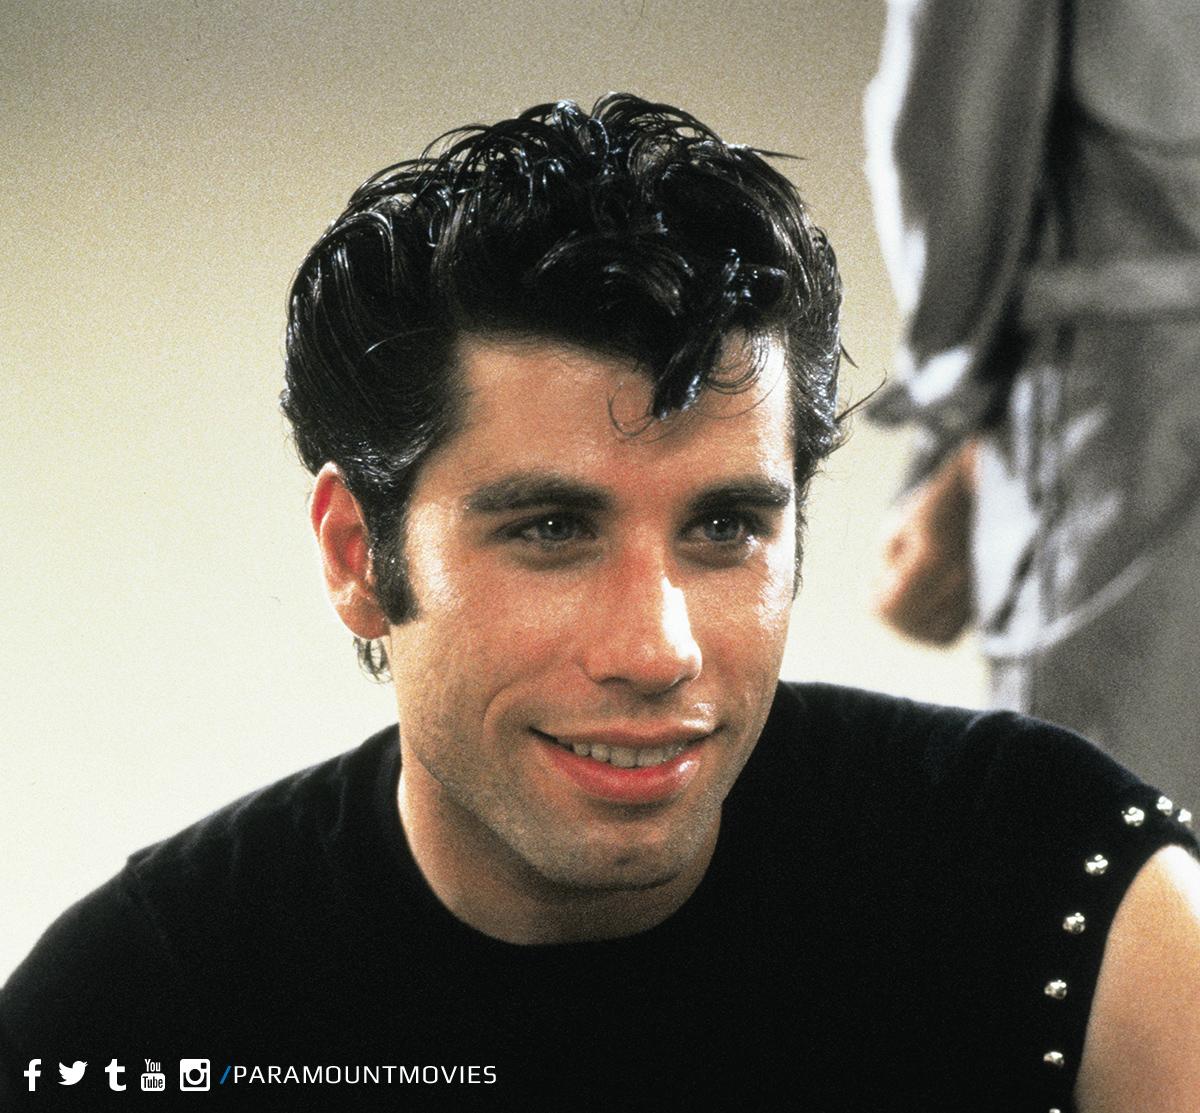 Happy Birthday to John Travolta! Which Travolta character would you want to party with? 